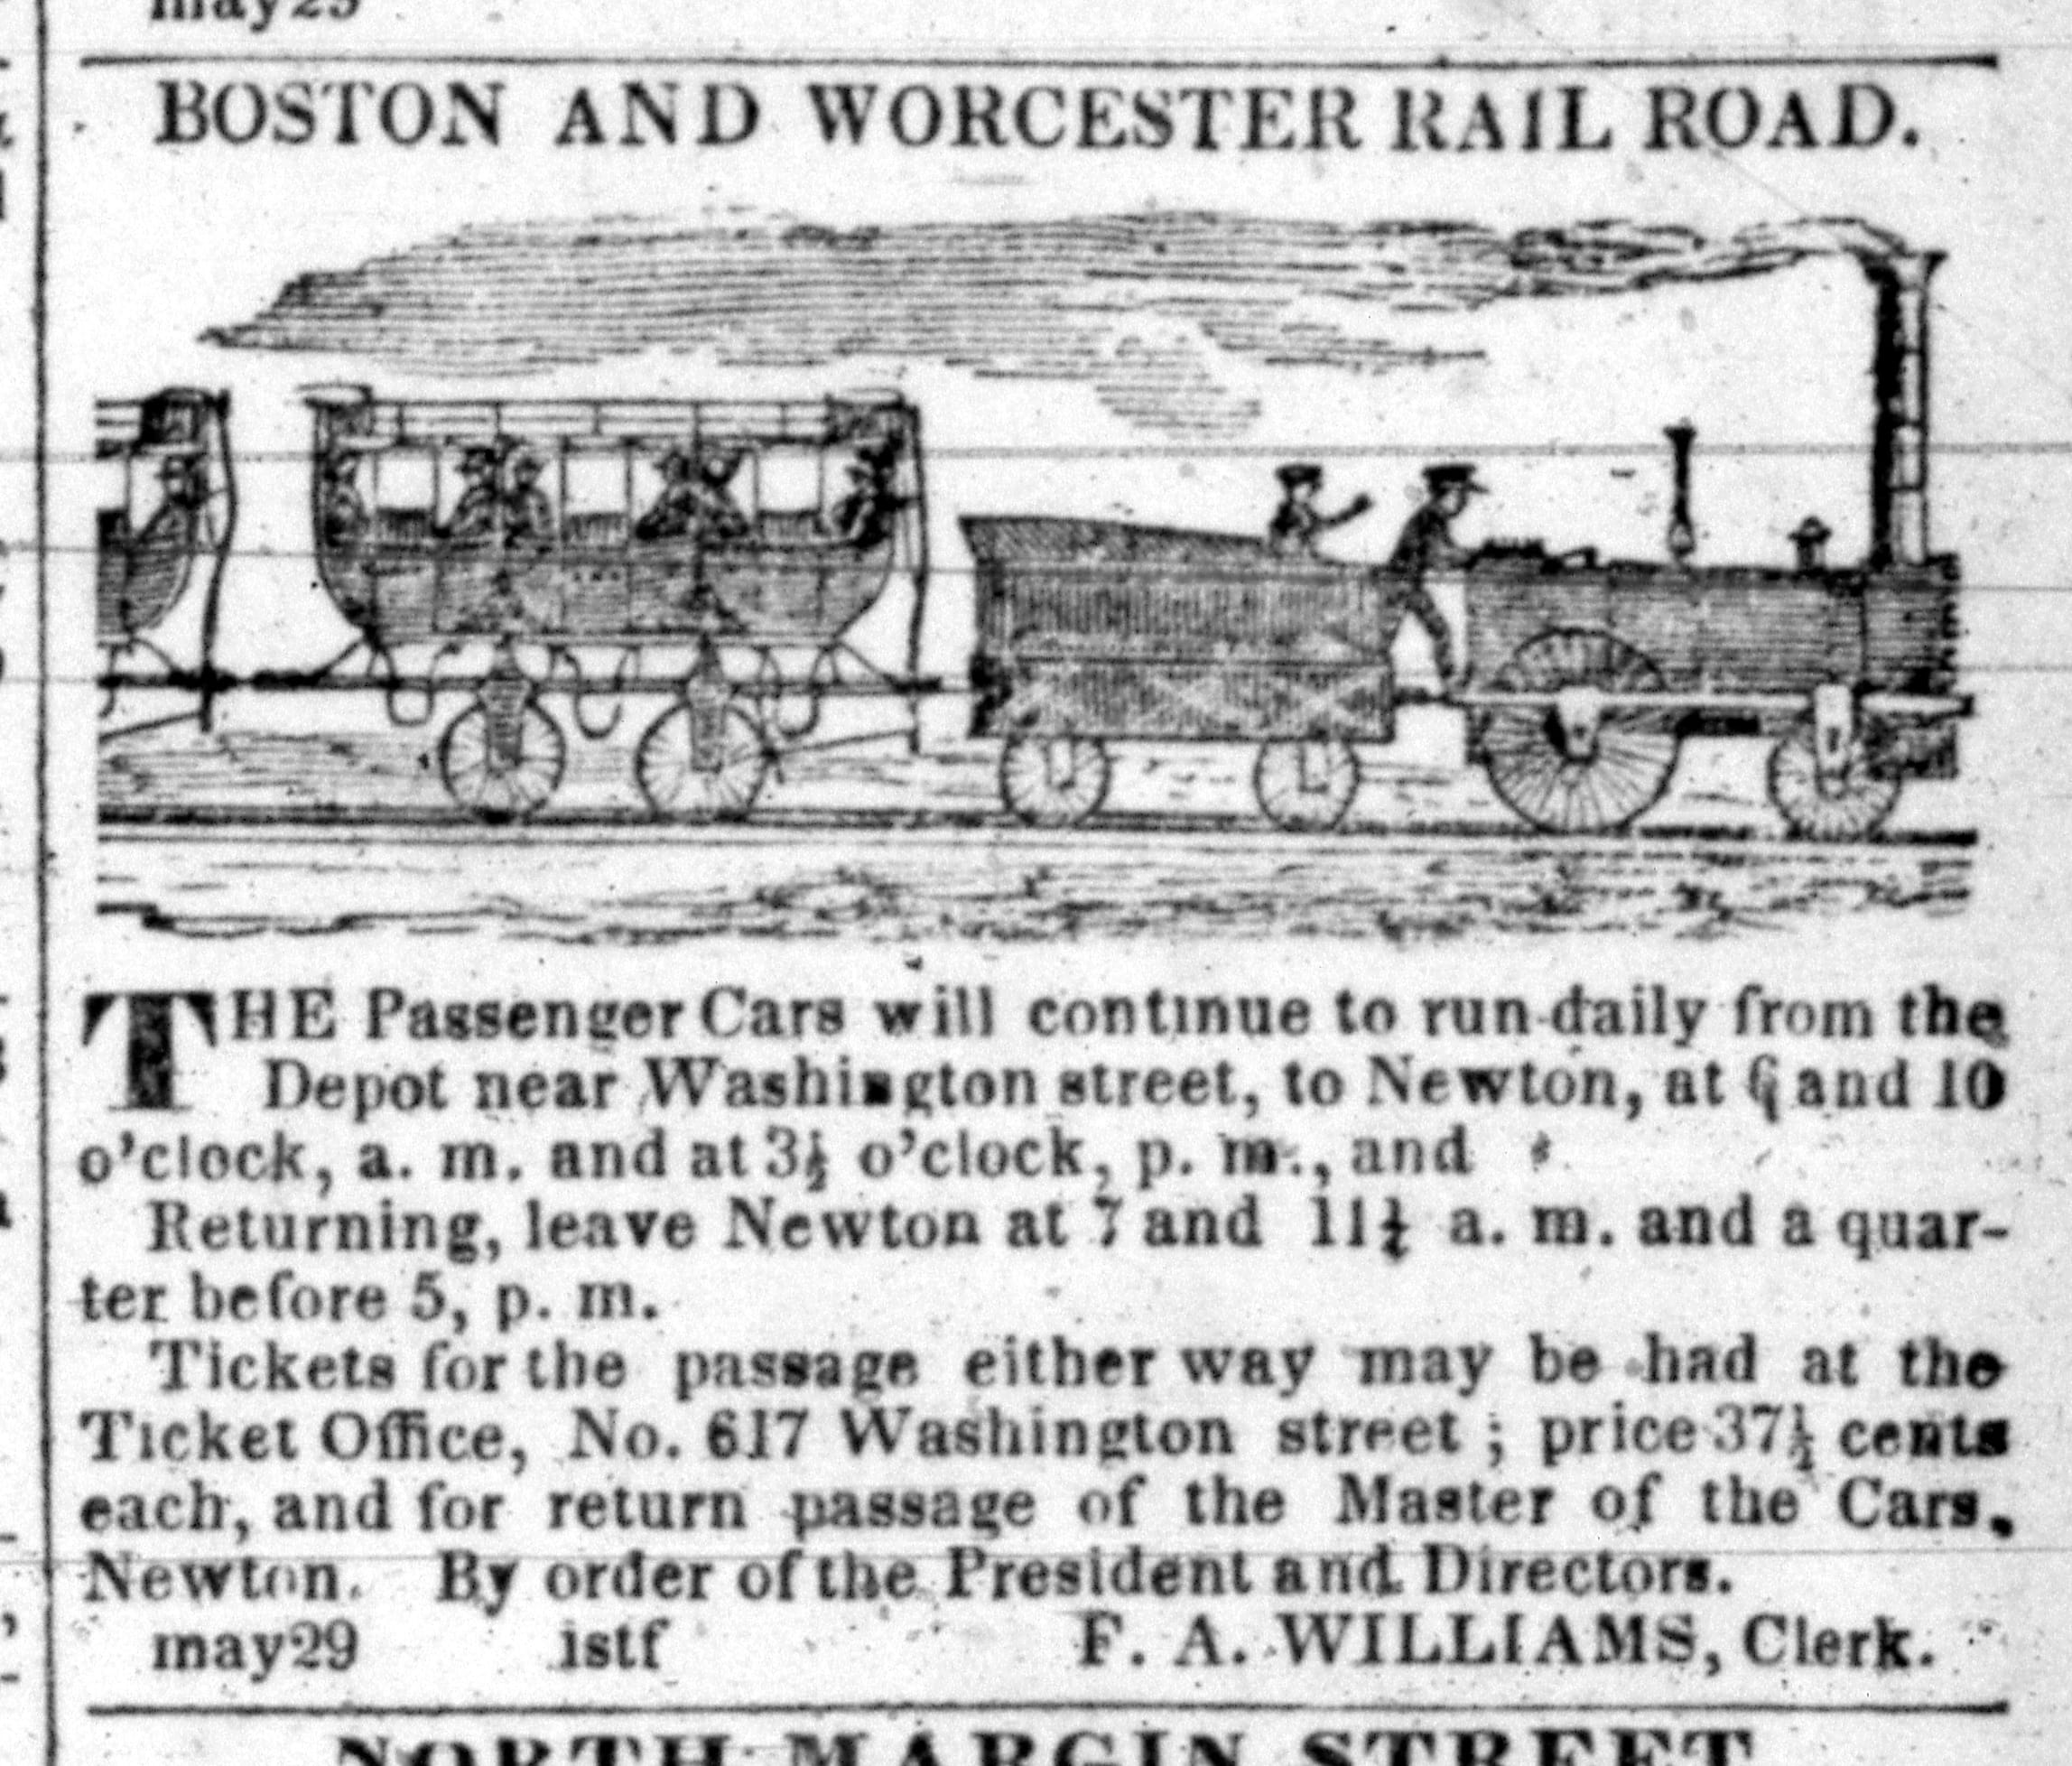 Image of Boston & Worcester Railroad advertisement in May 29, 1834 issue of “Boston Courier”